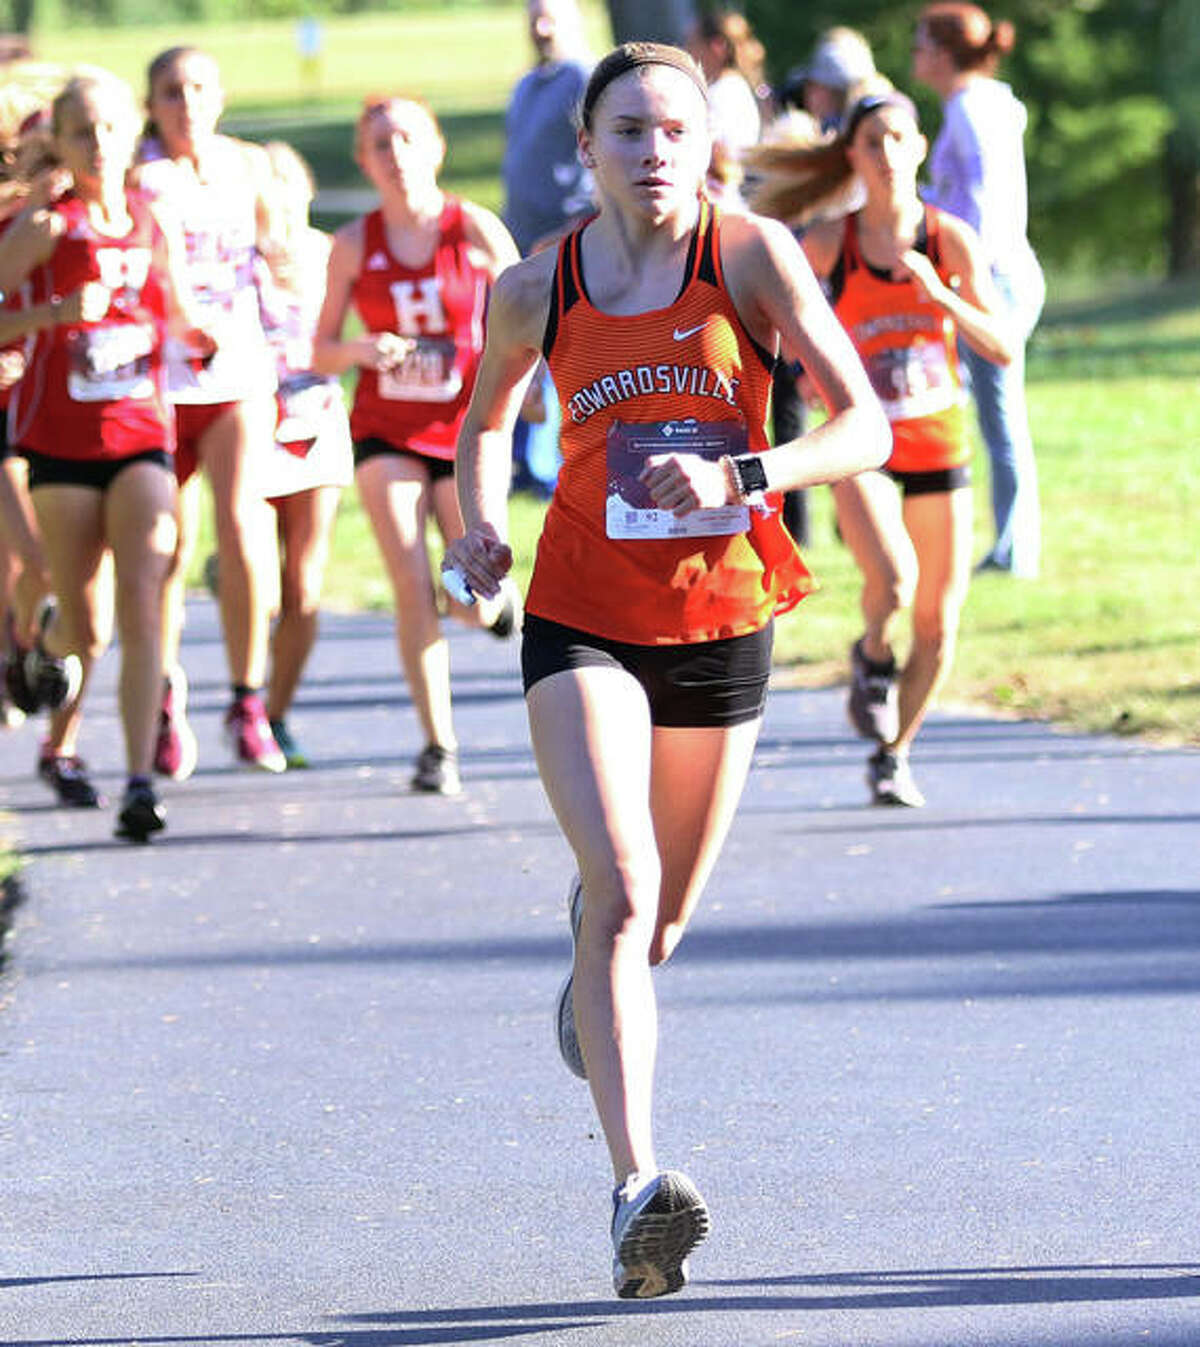 Edwardsville freshman Riley Knoyle, shown on her way to victory at the Madison County Meet on Oct. 8 at Belk Park in Wood River, added another win Saturday at the Class 3A Quincy Regional.